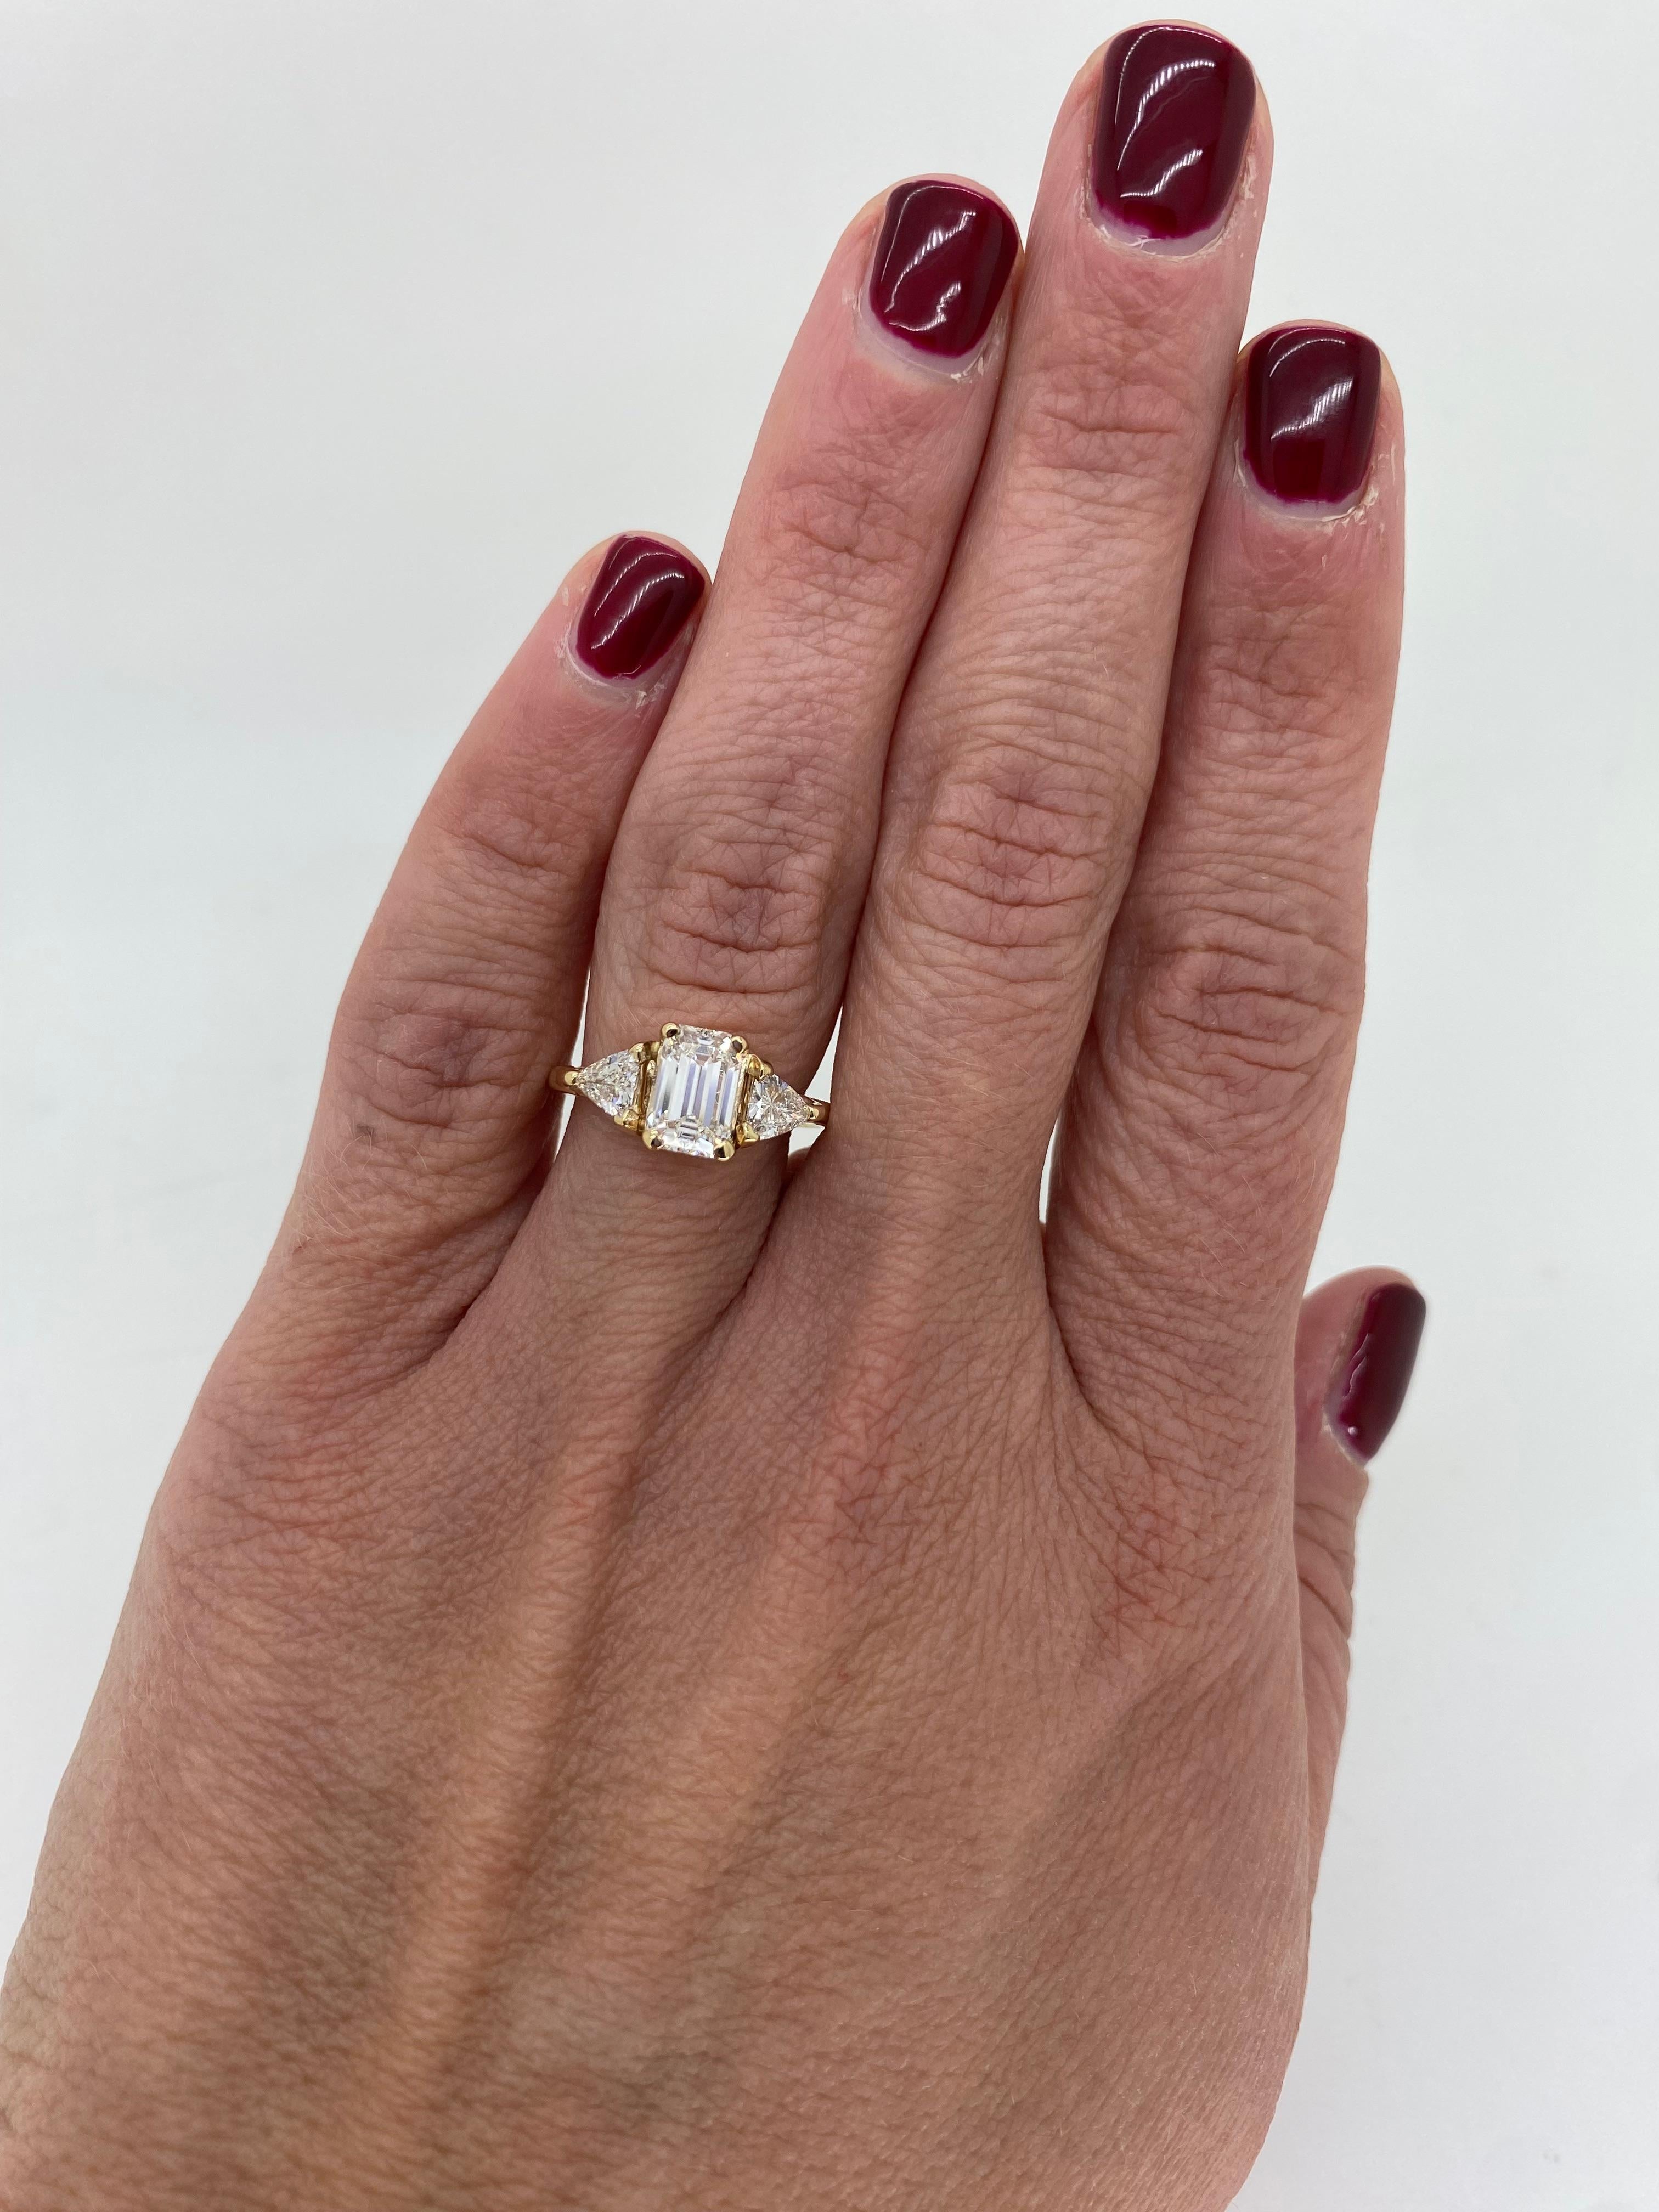 Custom three stone 1.33CTW Certified Emerald Cut Diamond engagement ring made in 14k yellow gold. 

Center Diamond Carat Weight: 1.33CT
Center Diamond Cut: Emerald
Center Diamond Color: F
Center Diamond Clarity: VS2
Certification: GIA